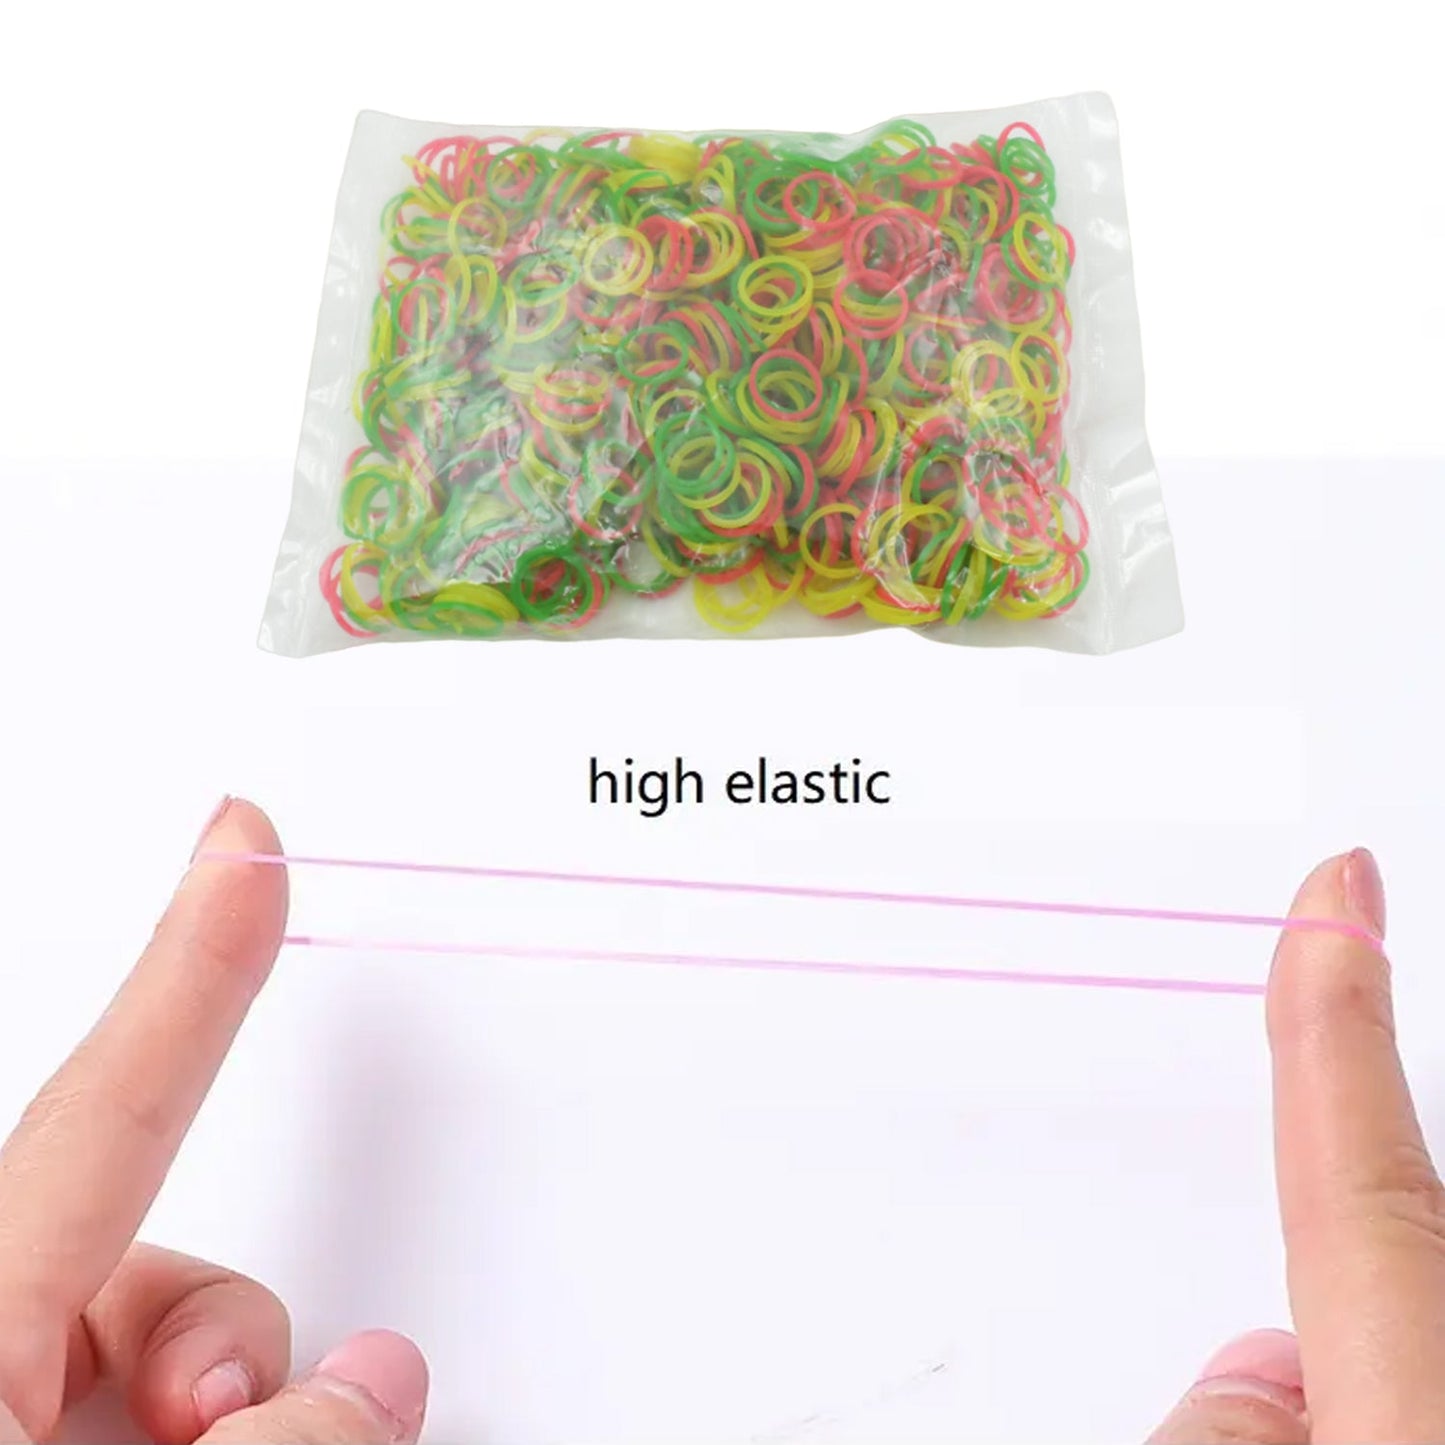 RUBBER BAND FOR OFFICE/HOME AND KITCHEN ACCESSORIES ITEM PRODUCTS, ELASTIC RUBBER BANDS, FLEXIBLE REUSABLE NYLON ELASTIC UNBREAKABLE, FOR STATIONERY, SCHOOL MULTICOLOR